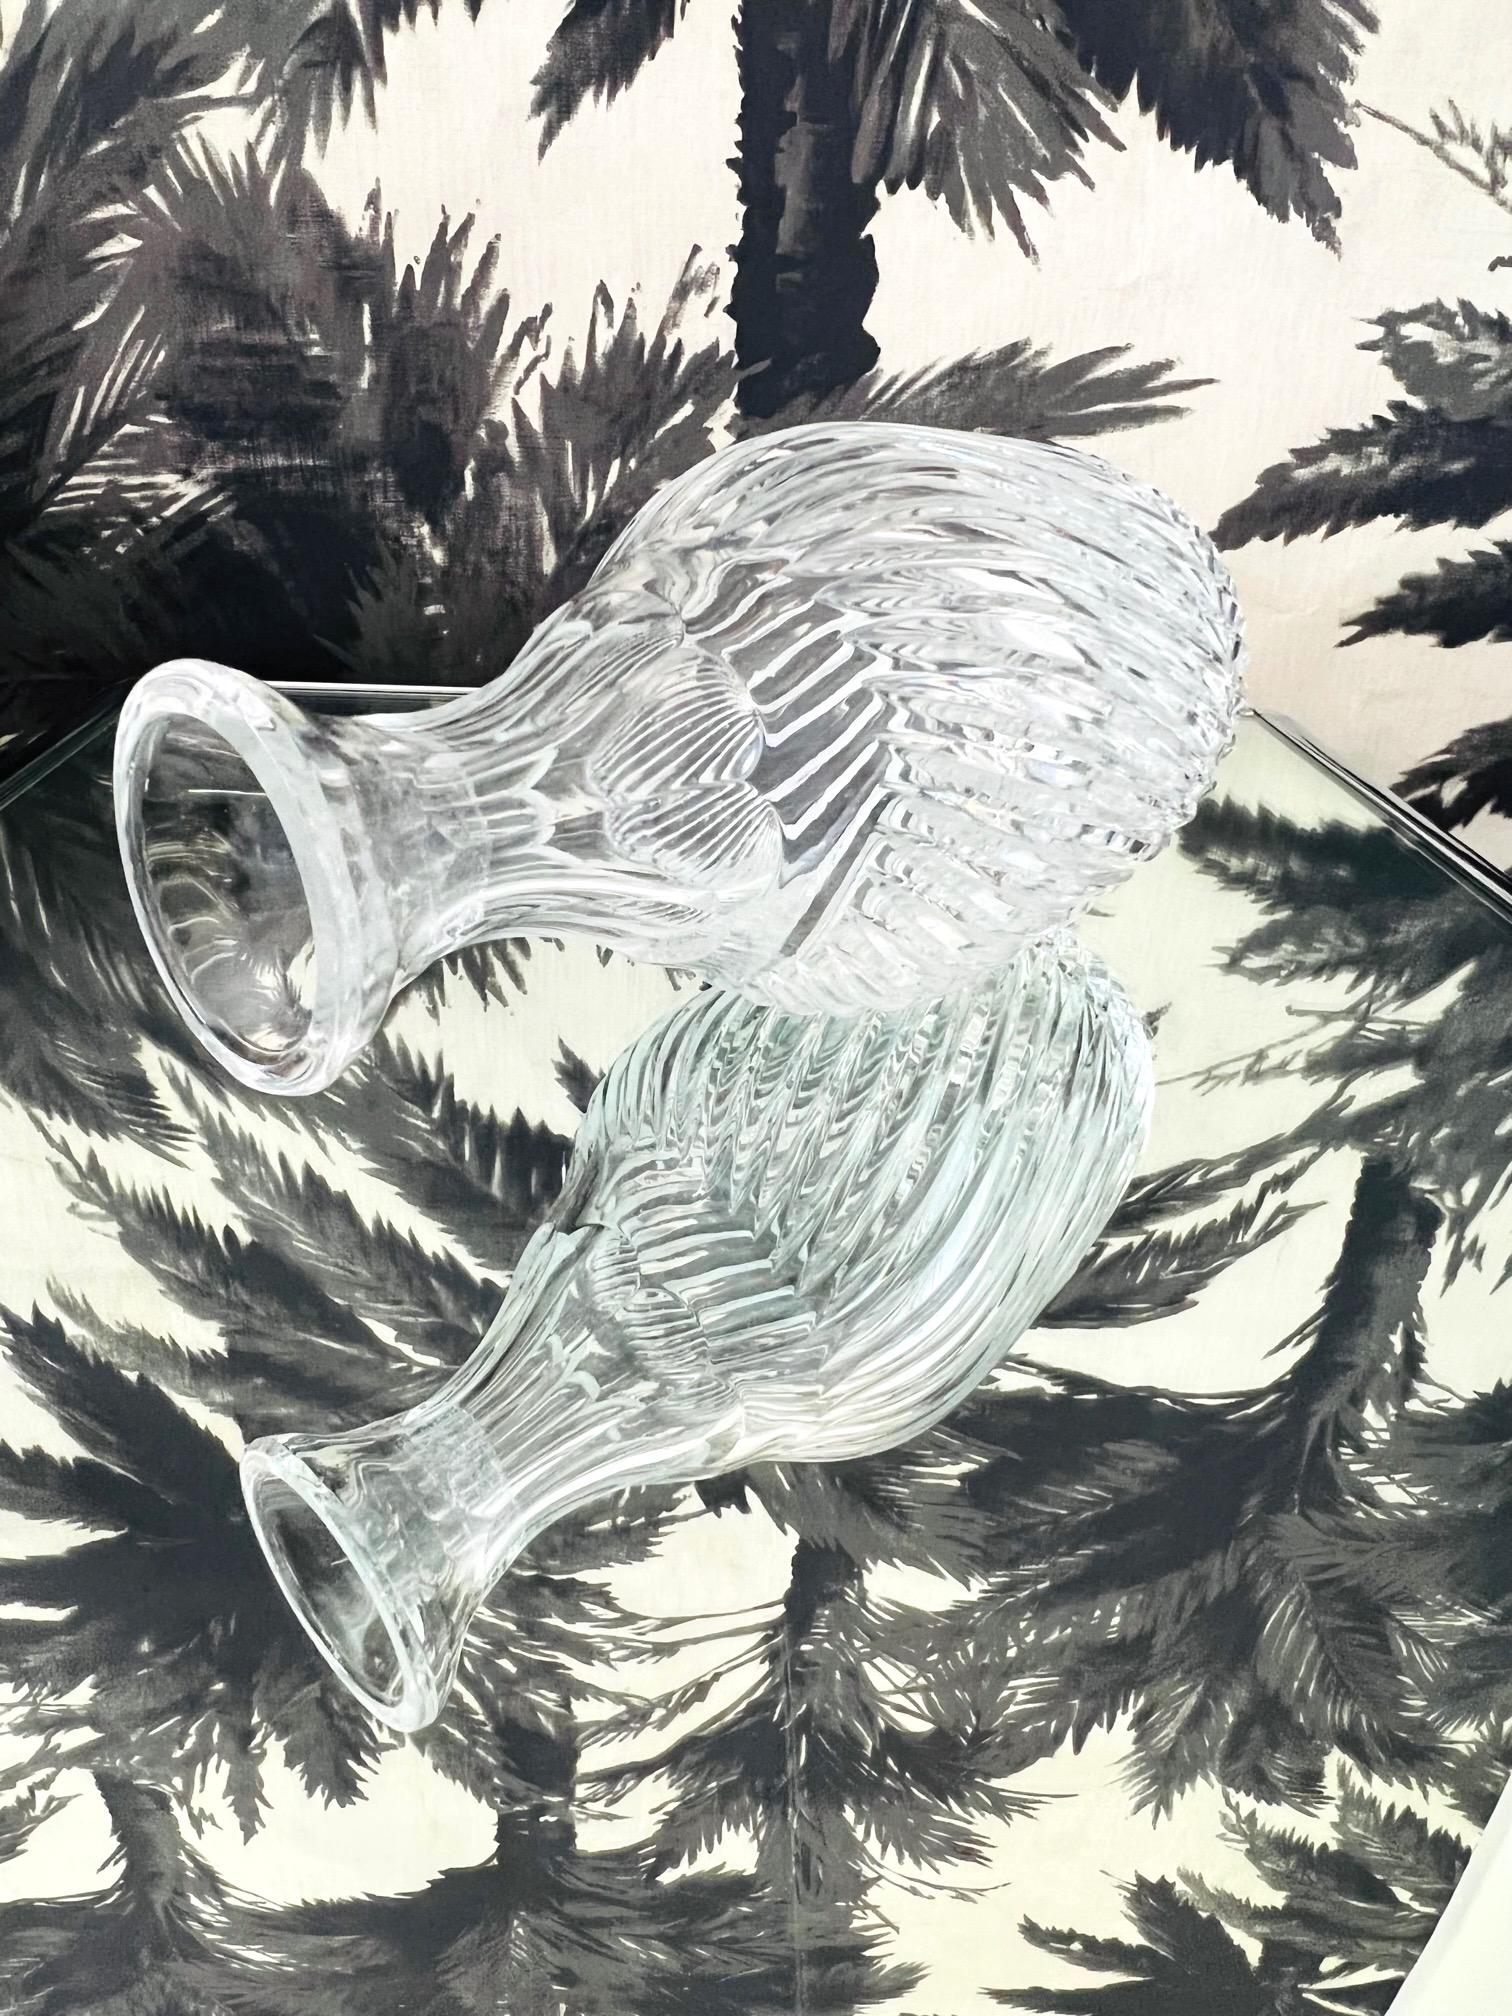 Late 20th Century Vintage French Crystal Decanter with Hand-Cut Swirl Designs, c. 1970's